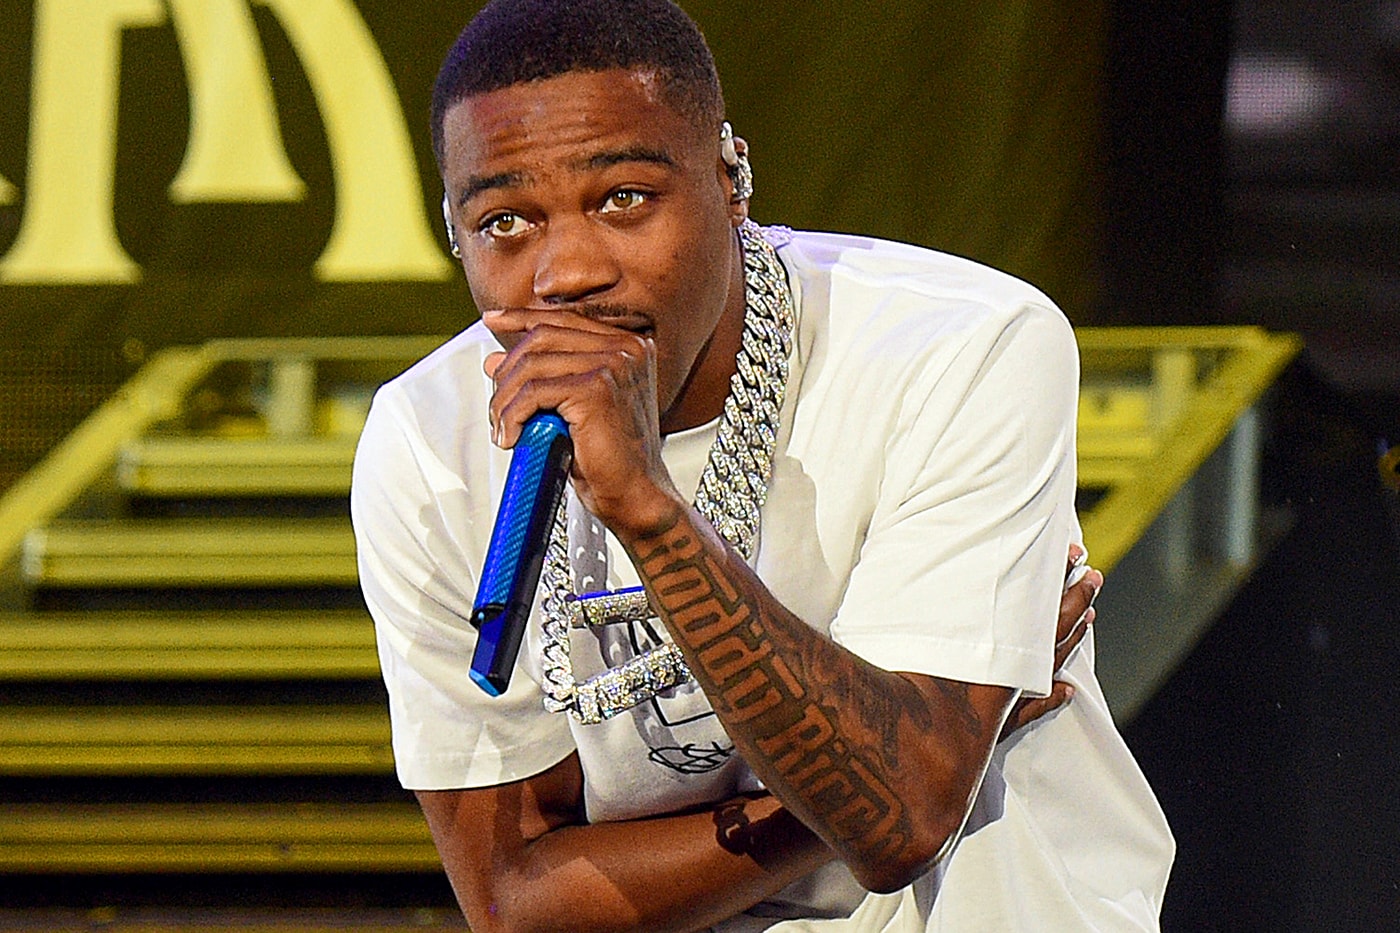 Roddy Ricch Teases New Album LIVE LIFE FAst Please Excuse Me For Being Antisocial followup